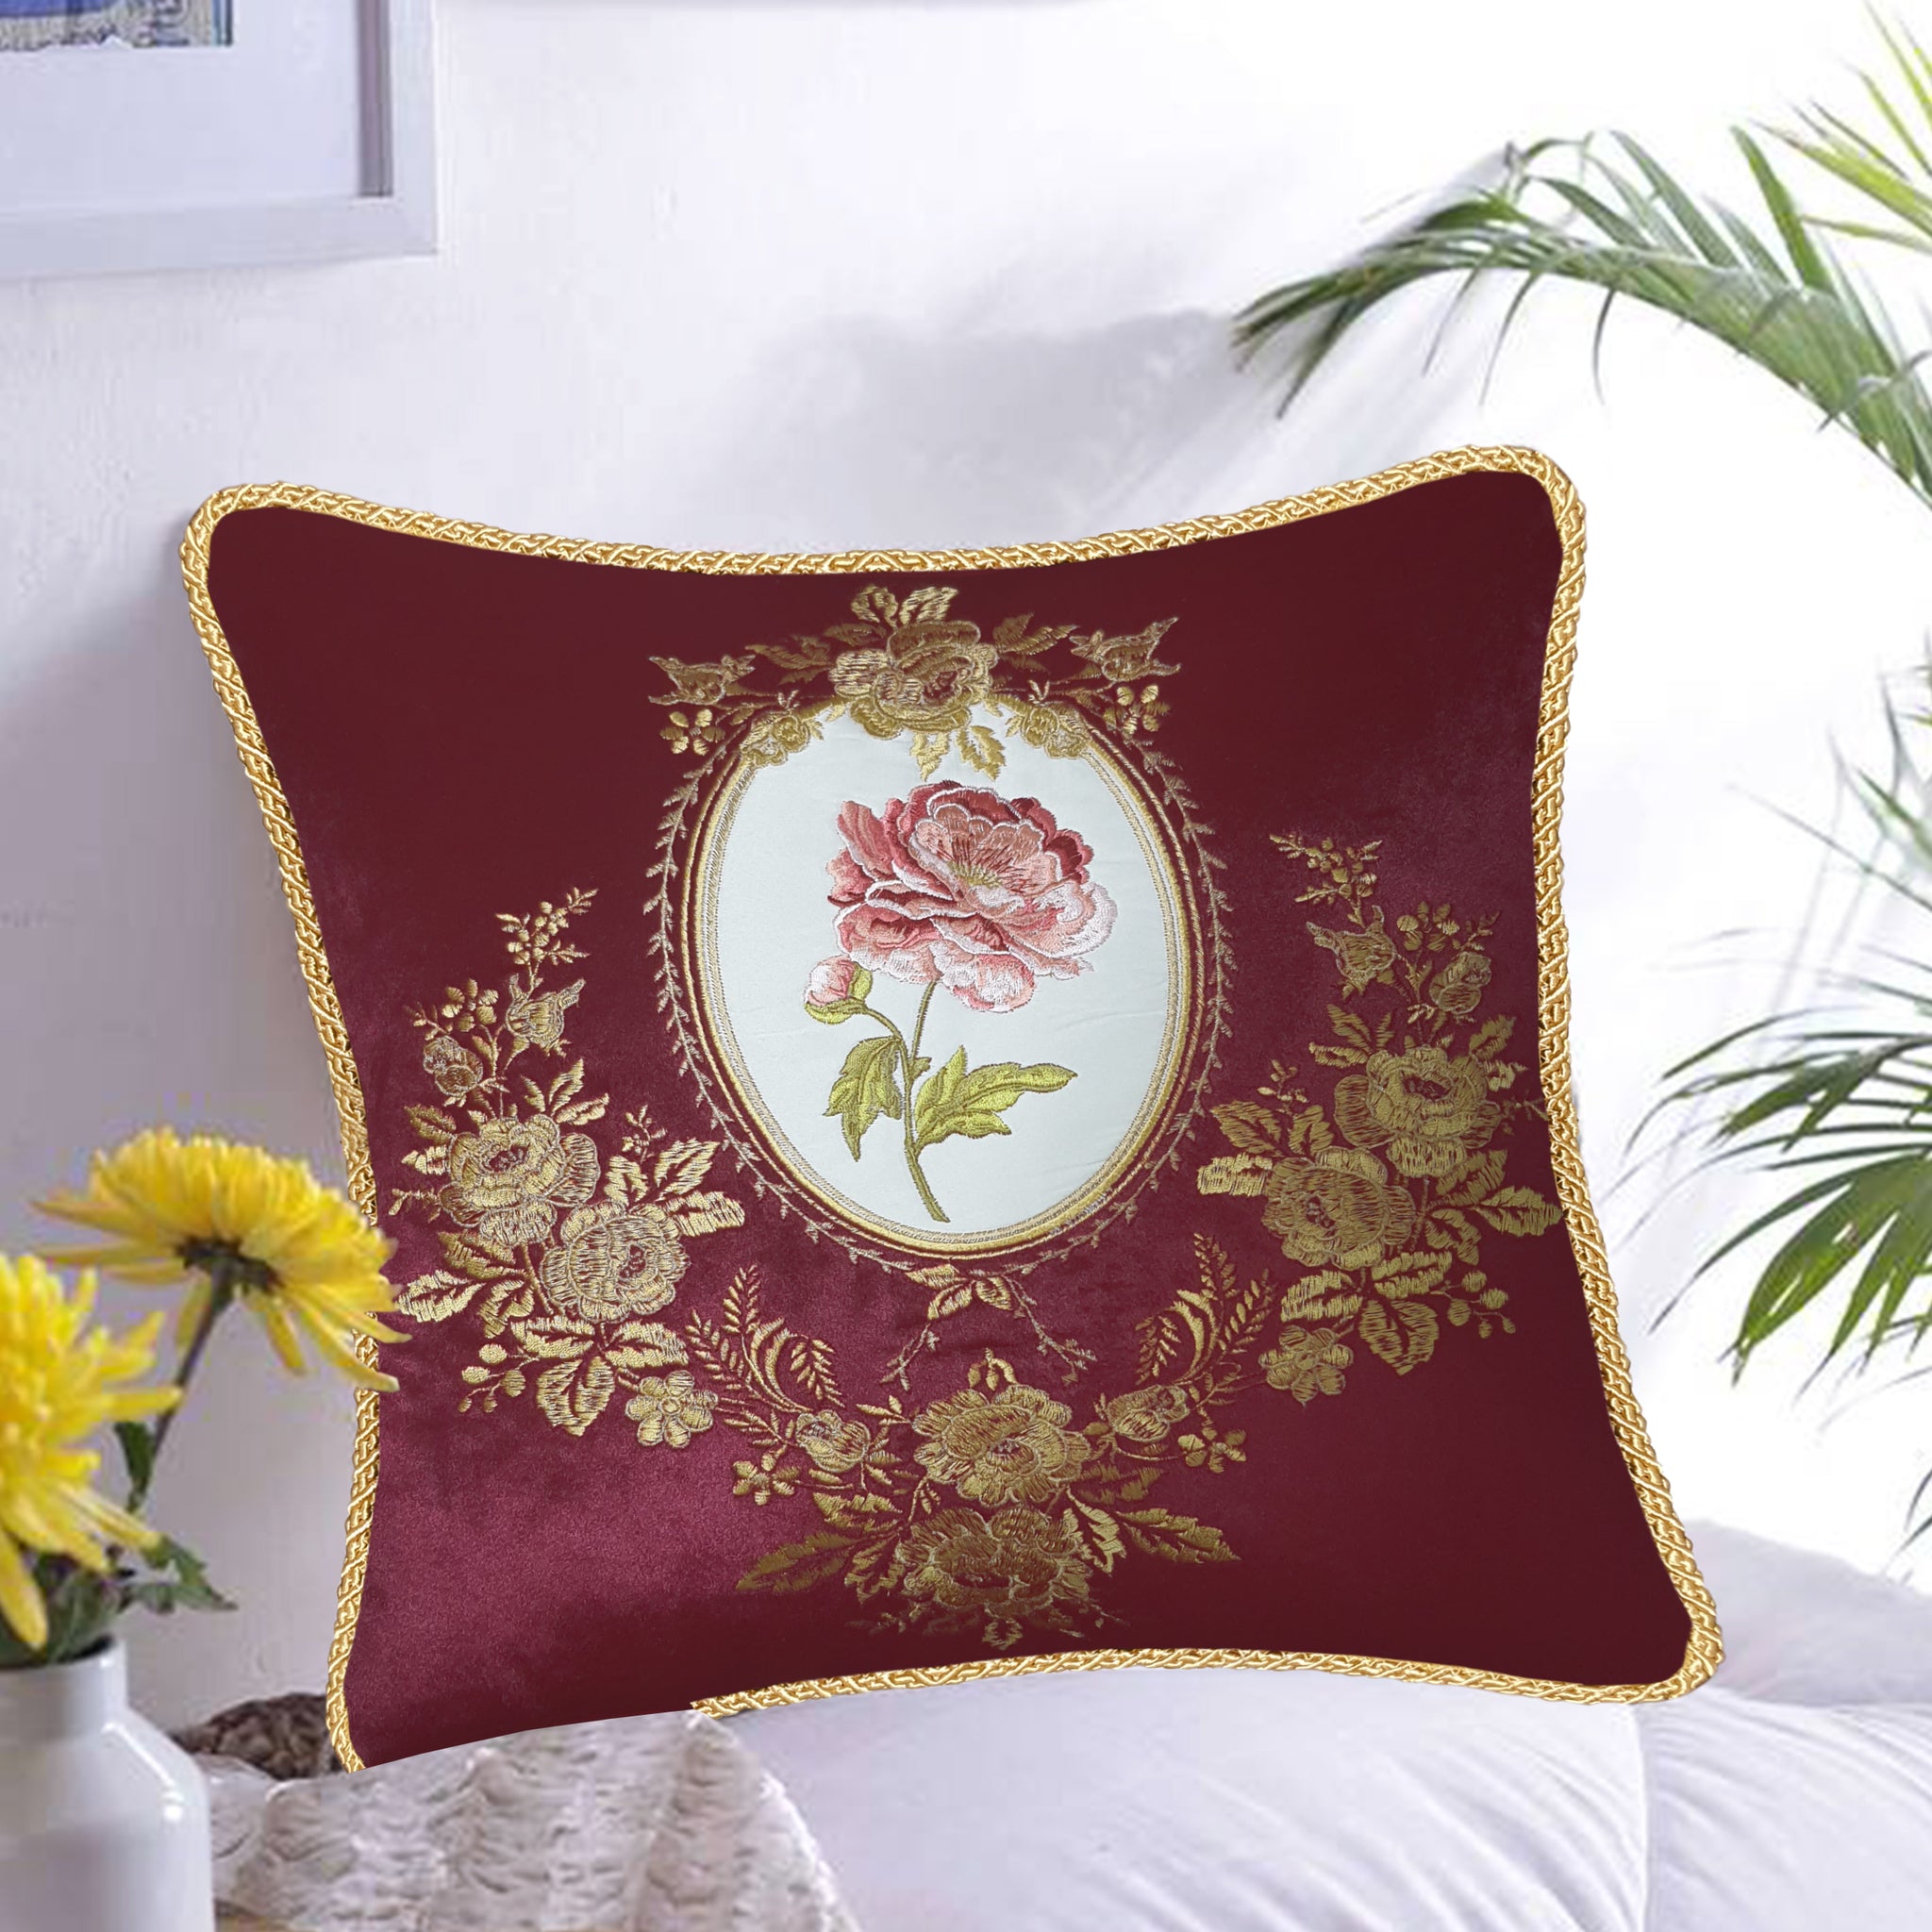  Velvet Cushion Cover Victorian Rose Decorative Pillowcase Classic Floral Embroidery Throw Pillow for Sofa Chair Living Room 45x45 cm 